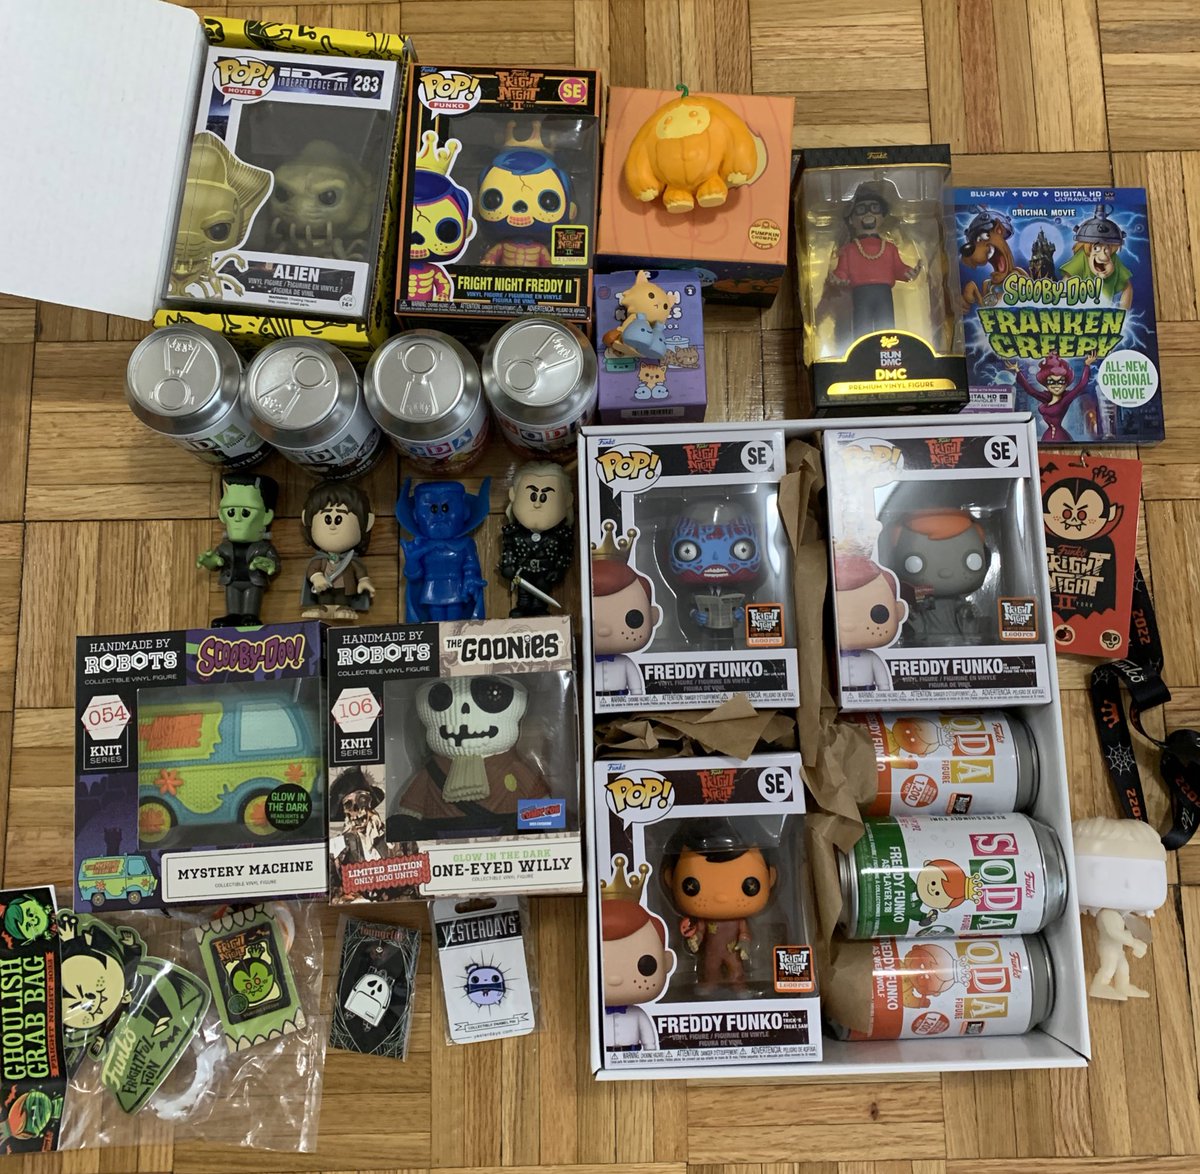 My #NYCC and #FunkoFrightNight haul!!! I had sooooooo much fun yesterday. Prevented myself from buying a lot more things 😂
I can’t believe it’s already over, I got to meet so many amazing people (apologies to those I missed!!) and had a blast. 
By far a fantastic first con!!!